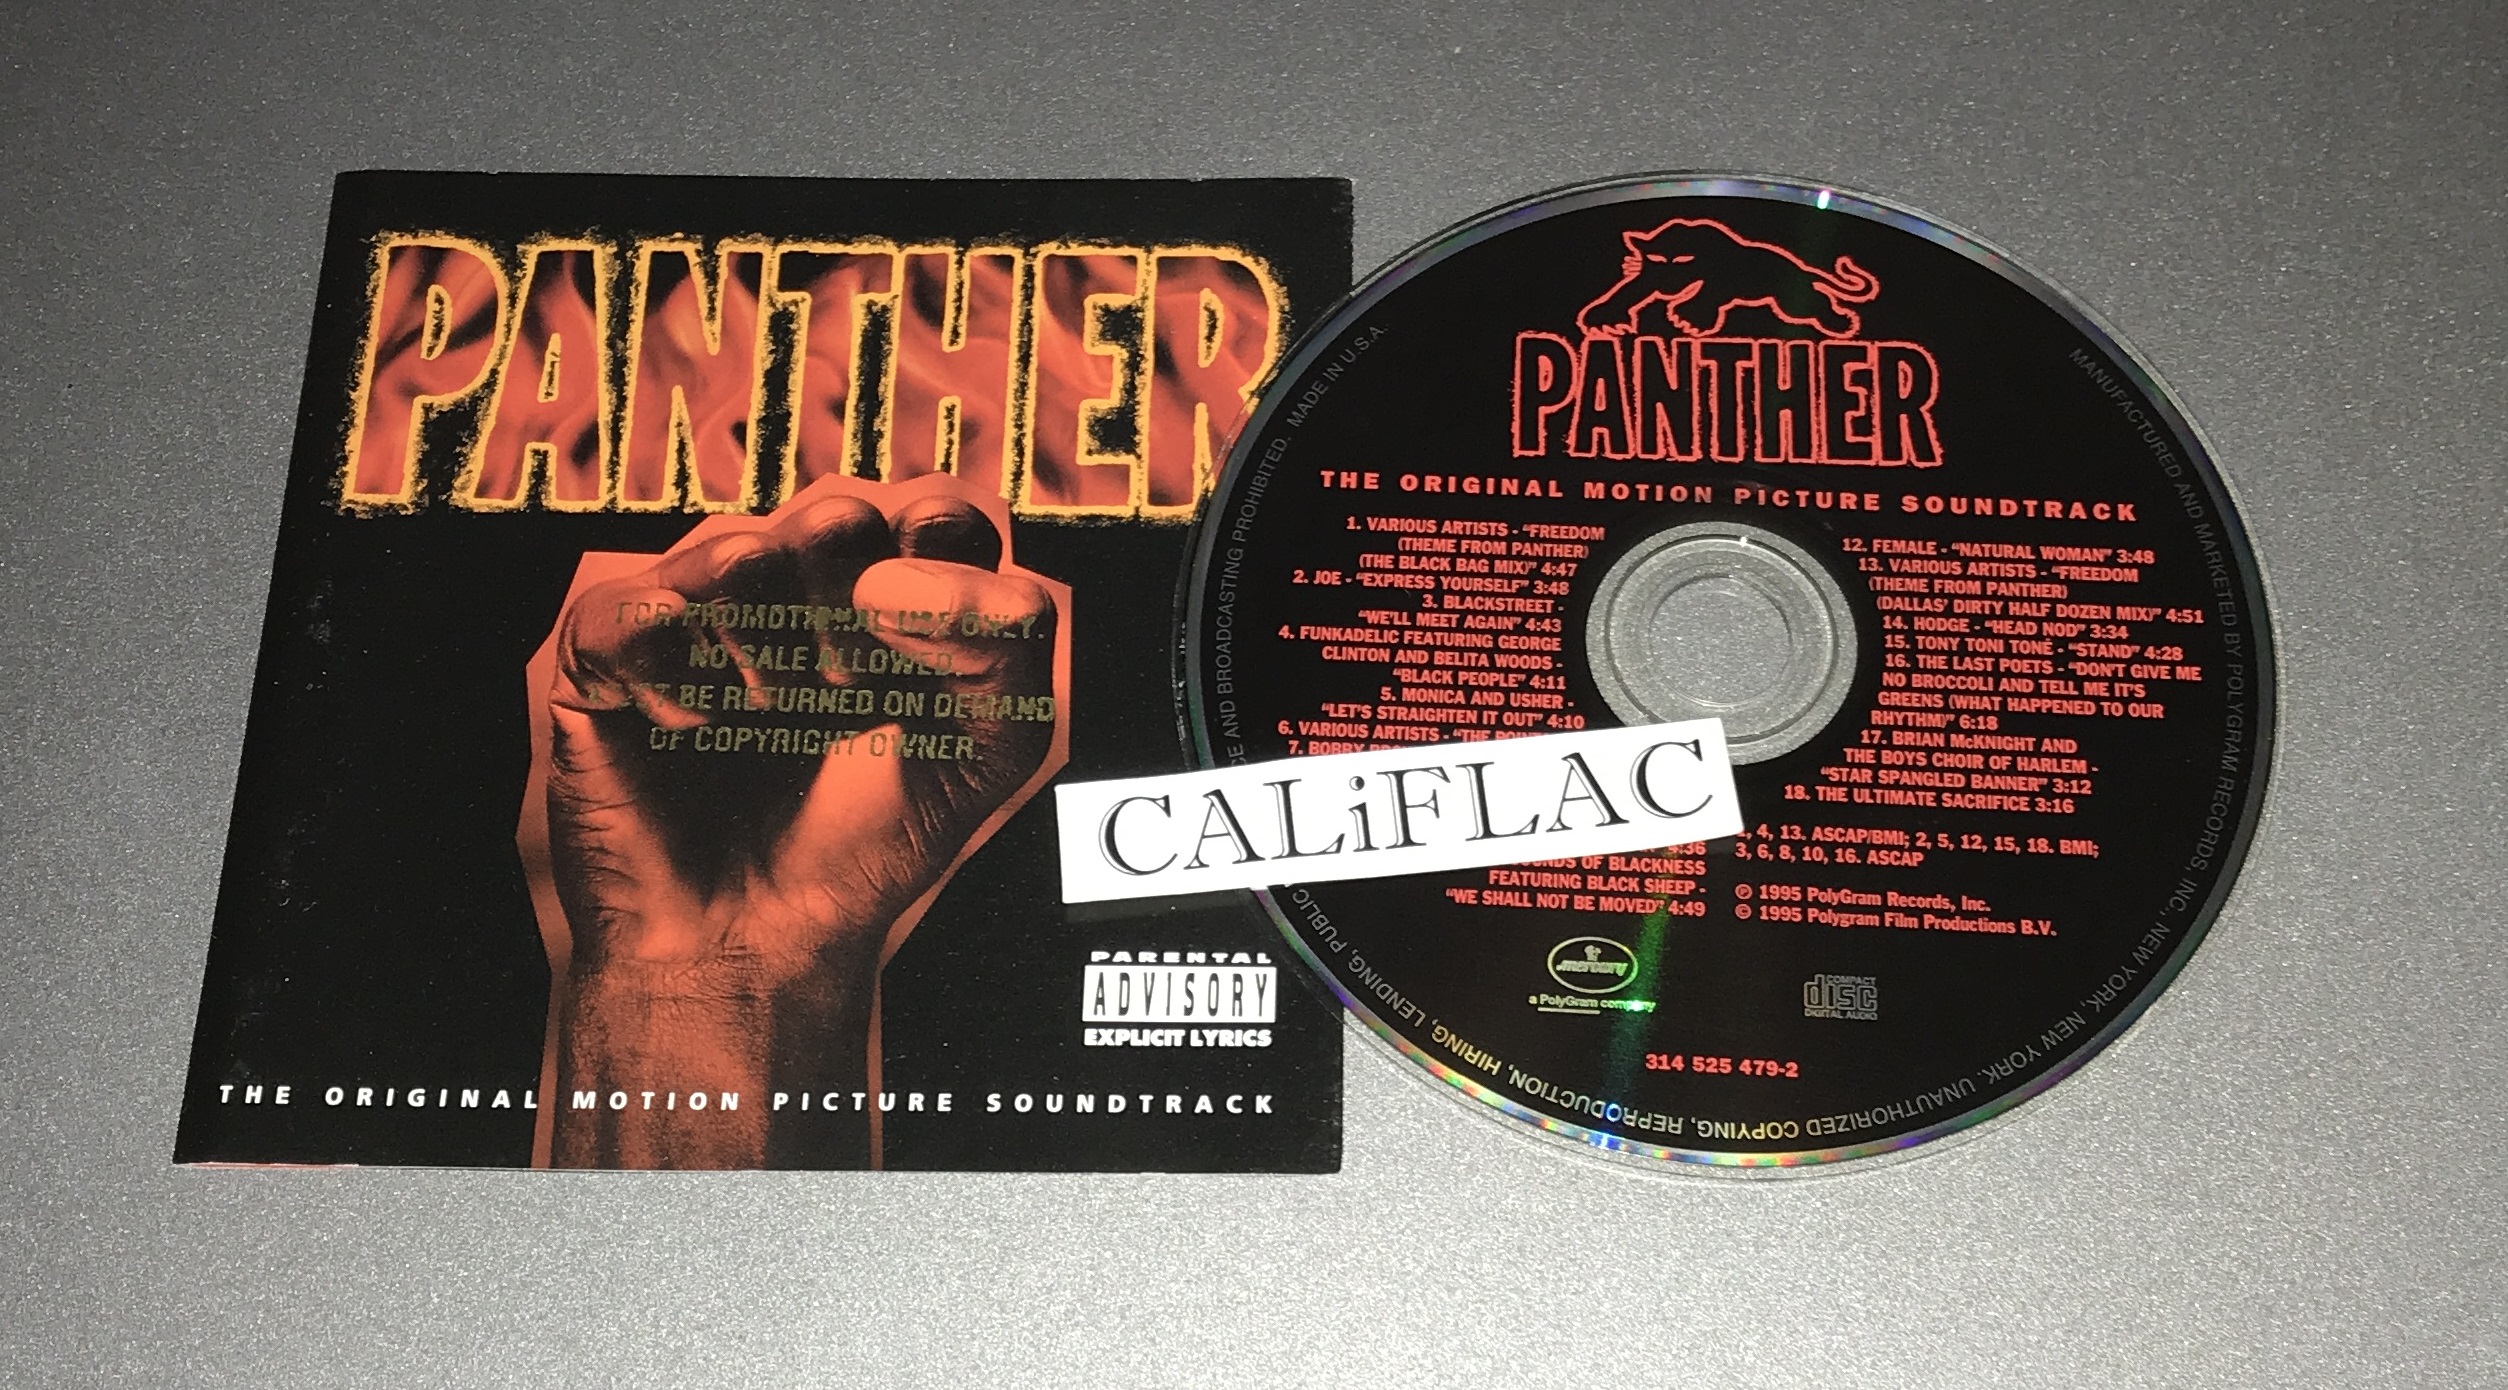 VA-Panther The Original Motion Picture Soundtrack-OST Promo-CD-FLAC-1995-CALiFLAC